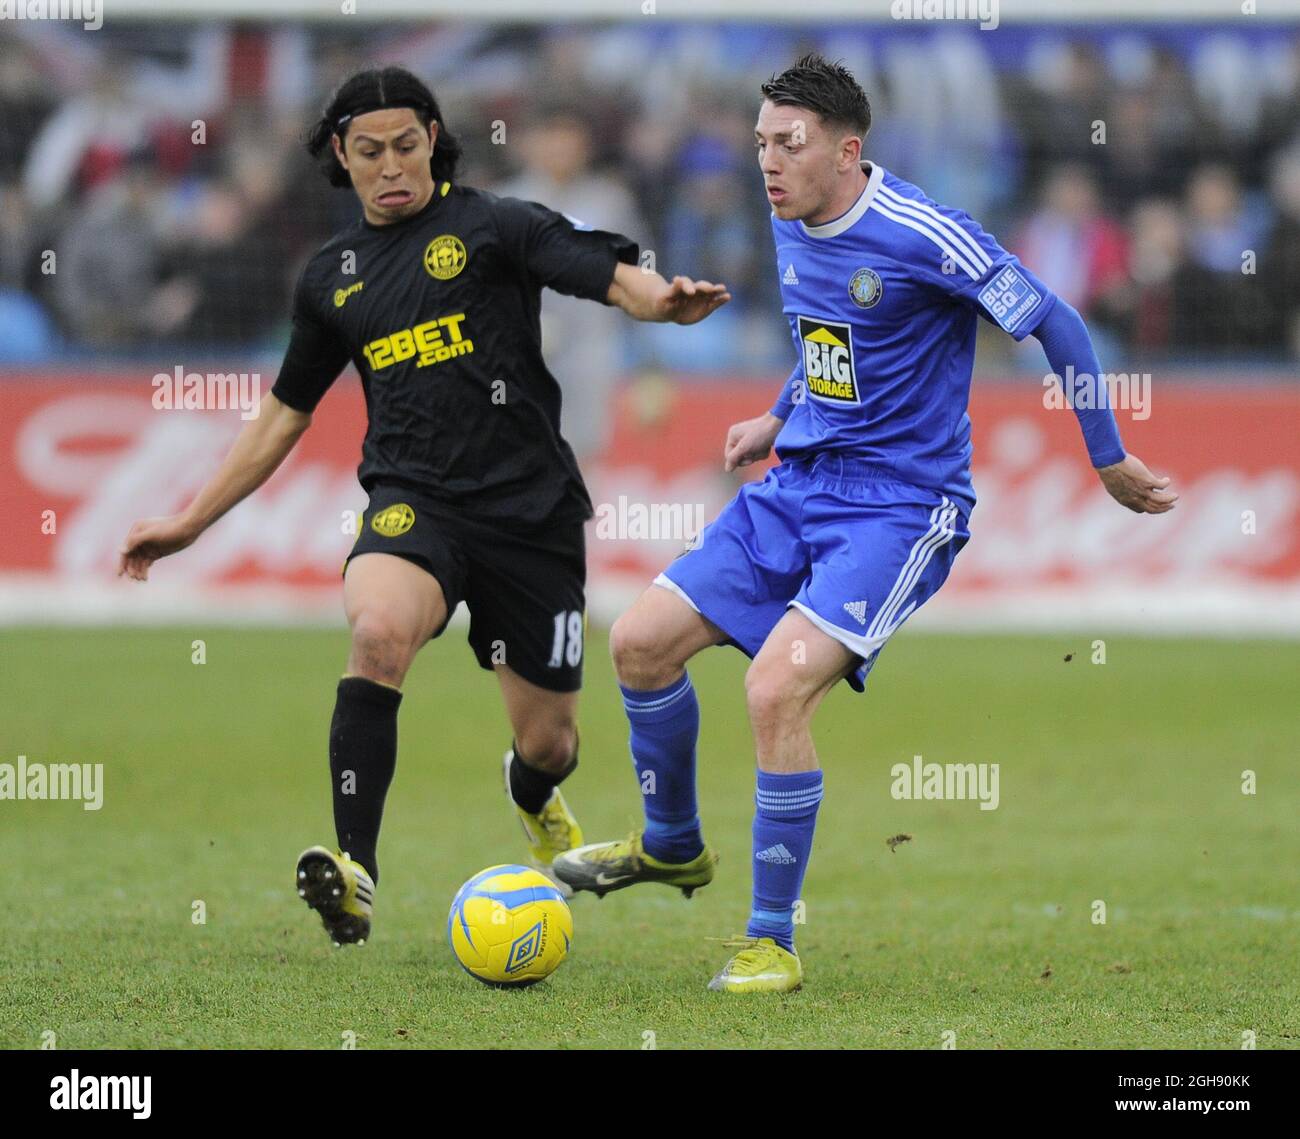 Roger Espinoza of Wigan Athletic tussles with Sam Wedgbury of Macclesfield Town during the FA Cup 4th Round match between Macclesfield Town and Wigan Athletic at the Moss Rose Stadium in Macclesfield, United Kingdom on 26th January 2013. Stock Photo